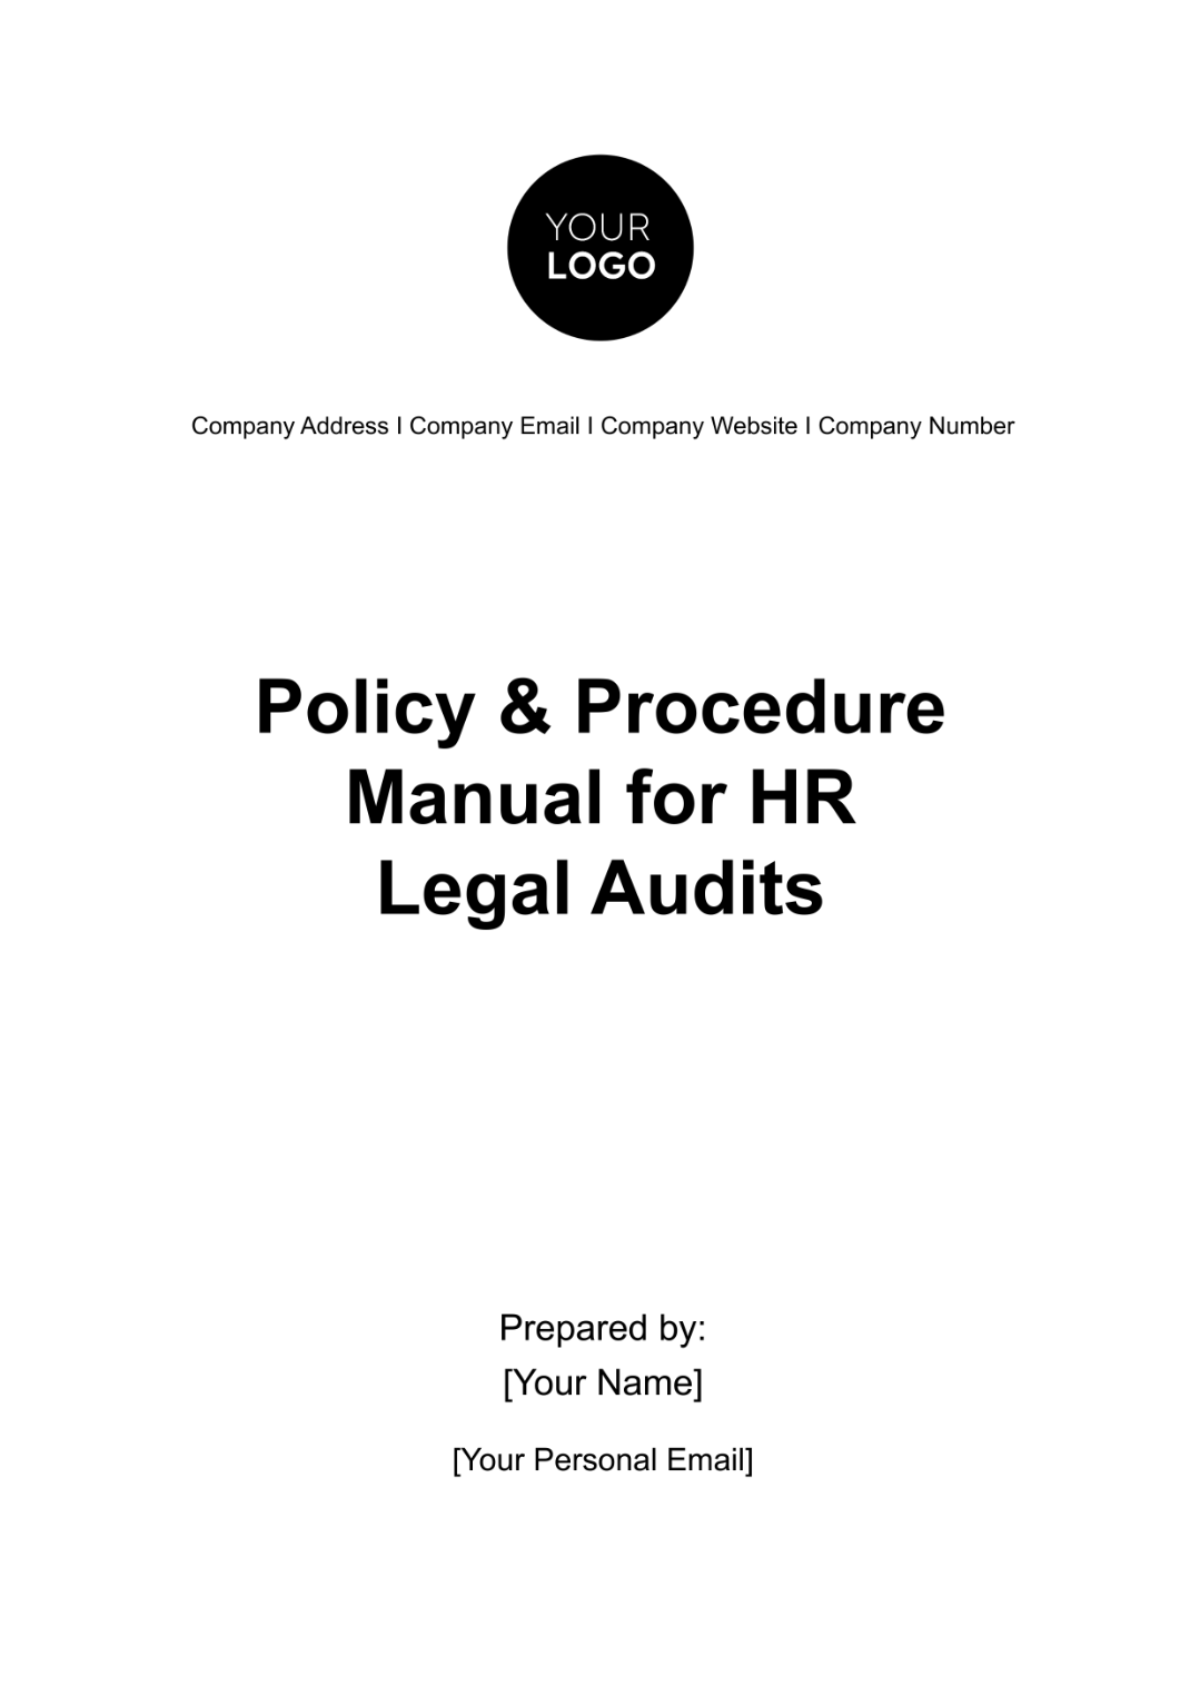 Free Policy & Procedure Manual for HR Legal Audits Template